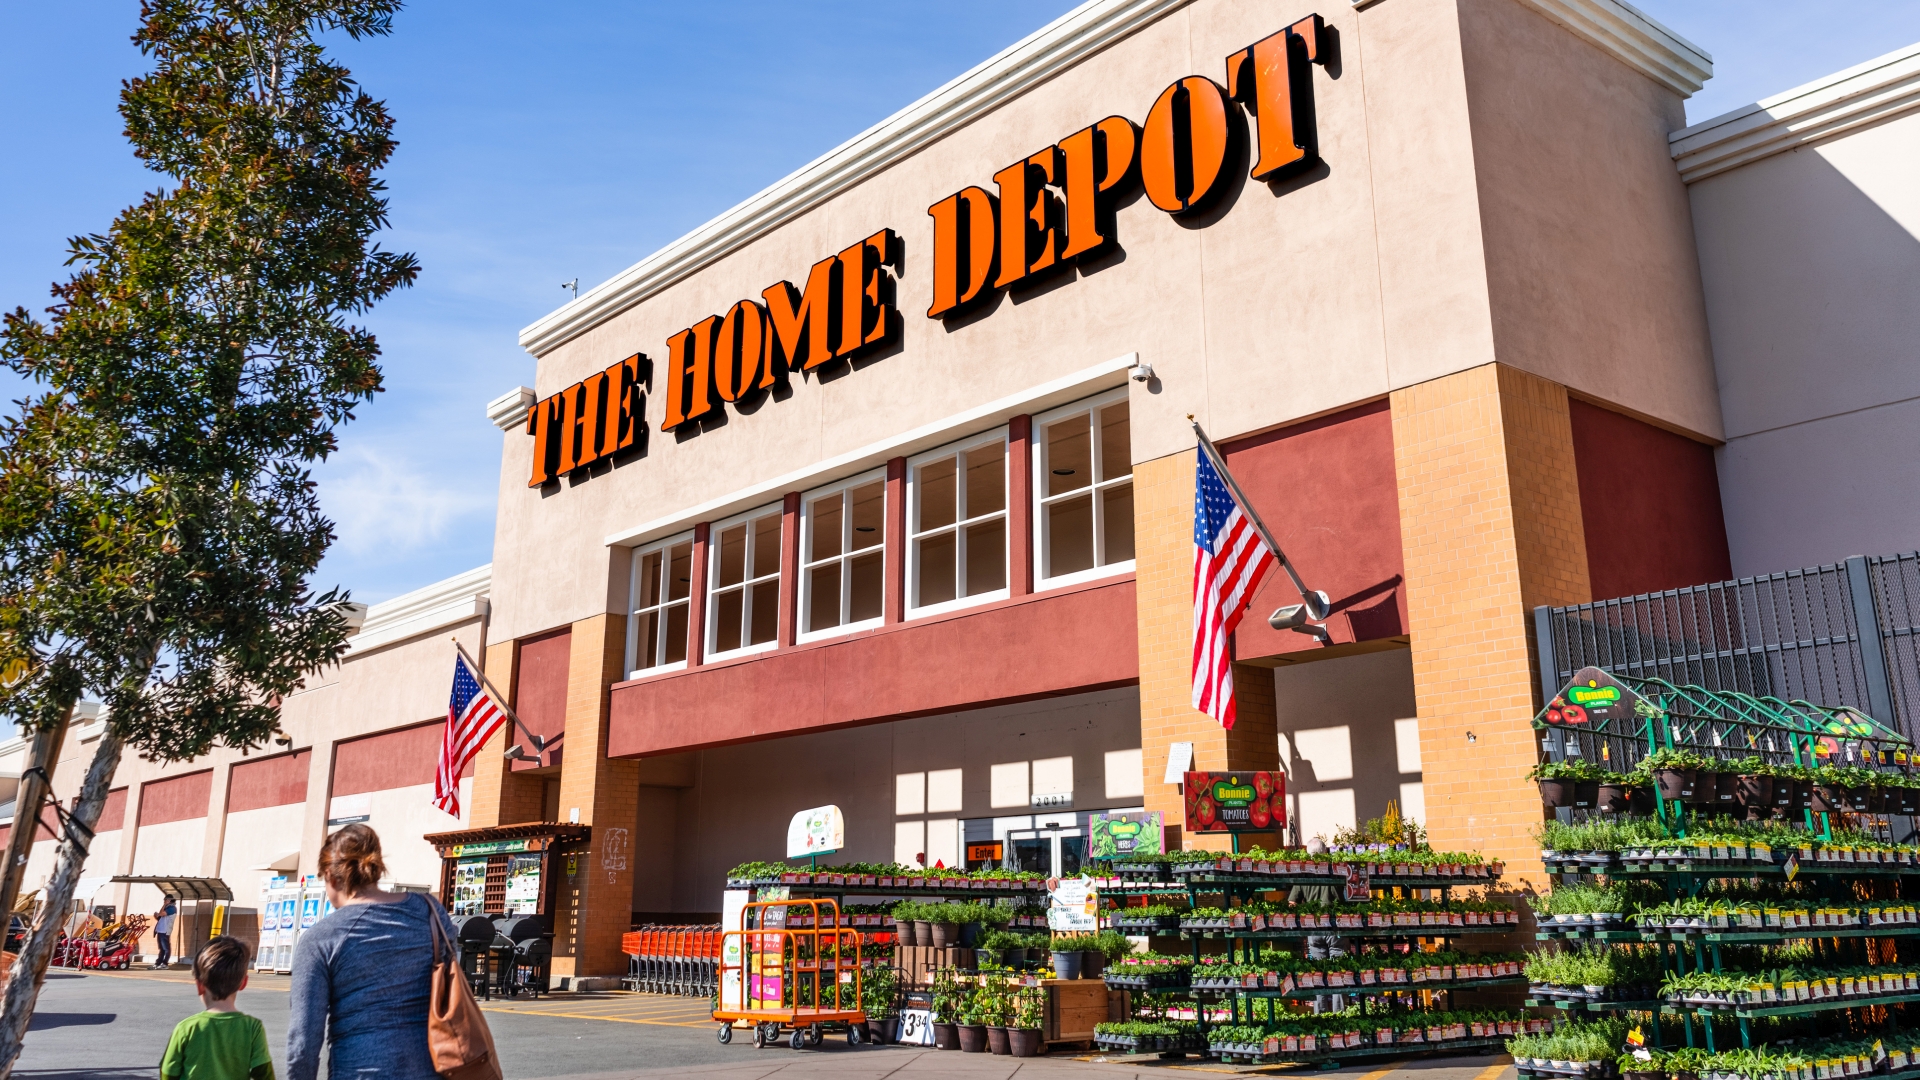 here’s how much a $1,000 investment in home depot stock 10 years ago would be worth today